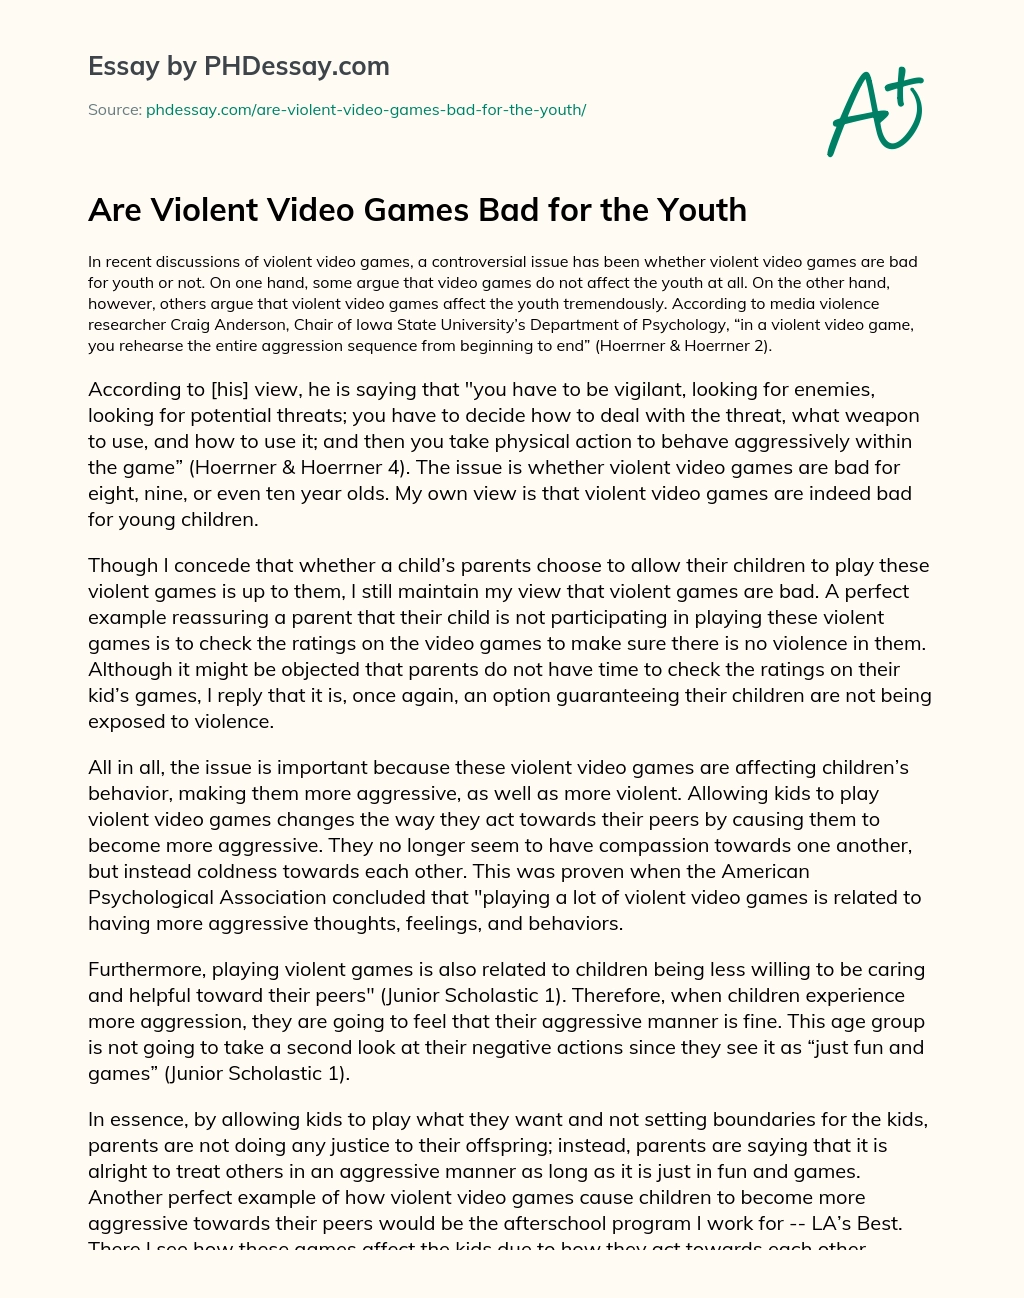 Are Violent Video Games Bad for the Youth essay